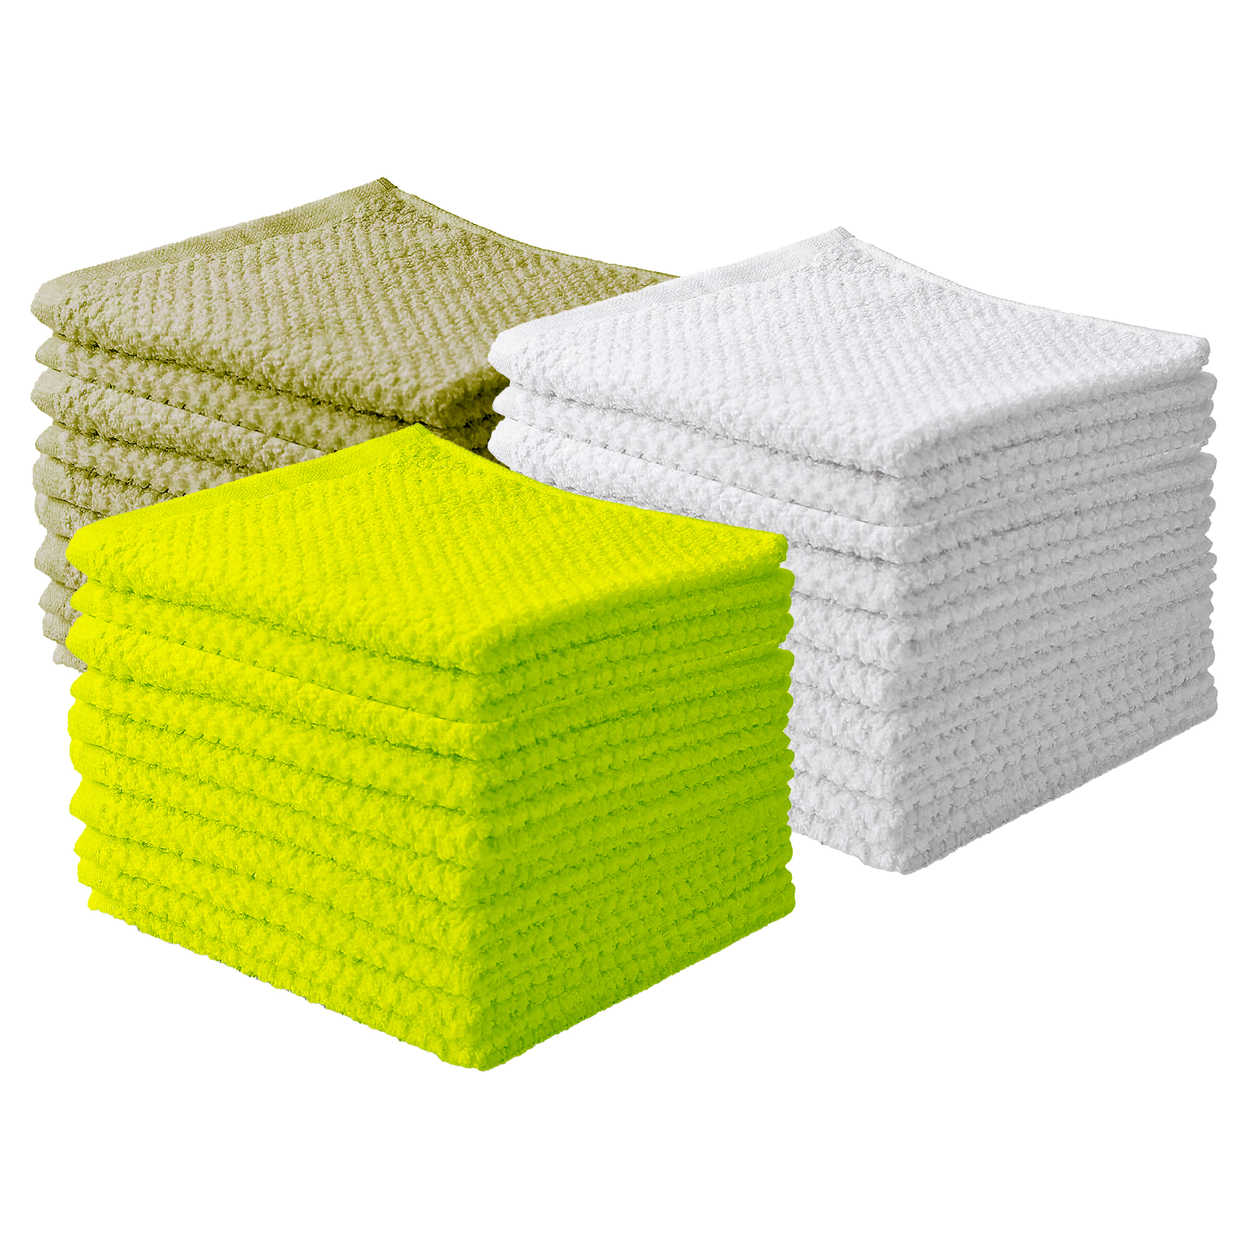 30-Pack: Multipurpose Super Absorbent Ultra Soft 100% Cotton Ring Spun Stitched Wash Cloths